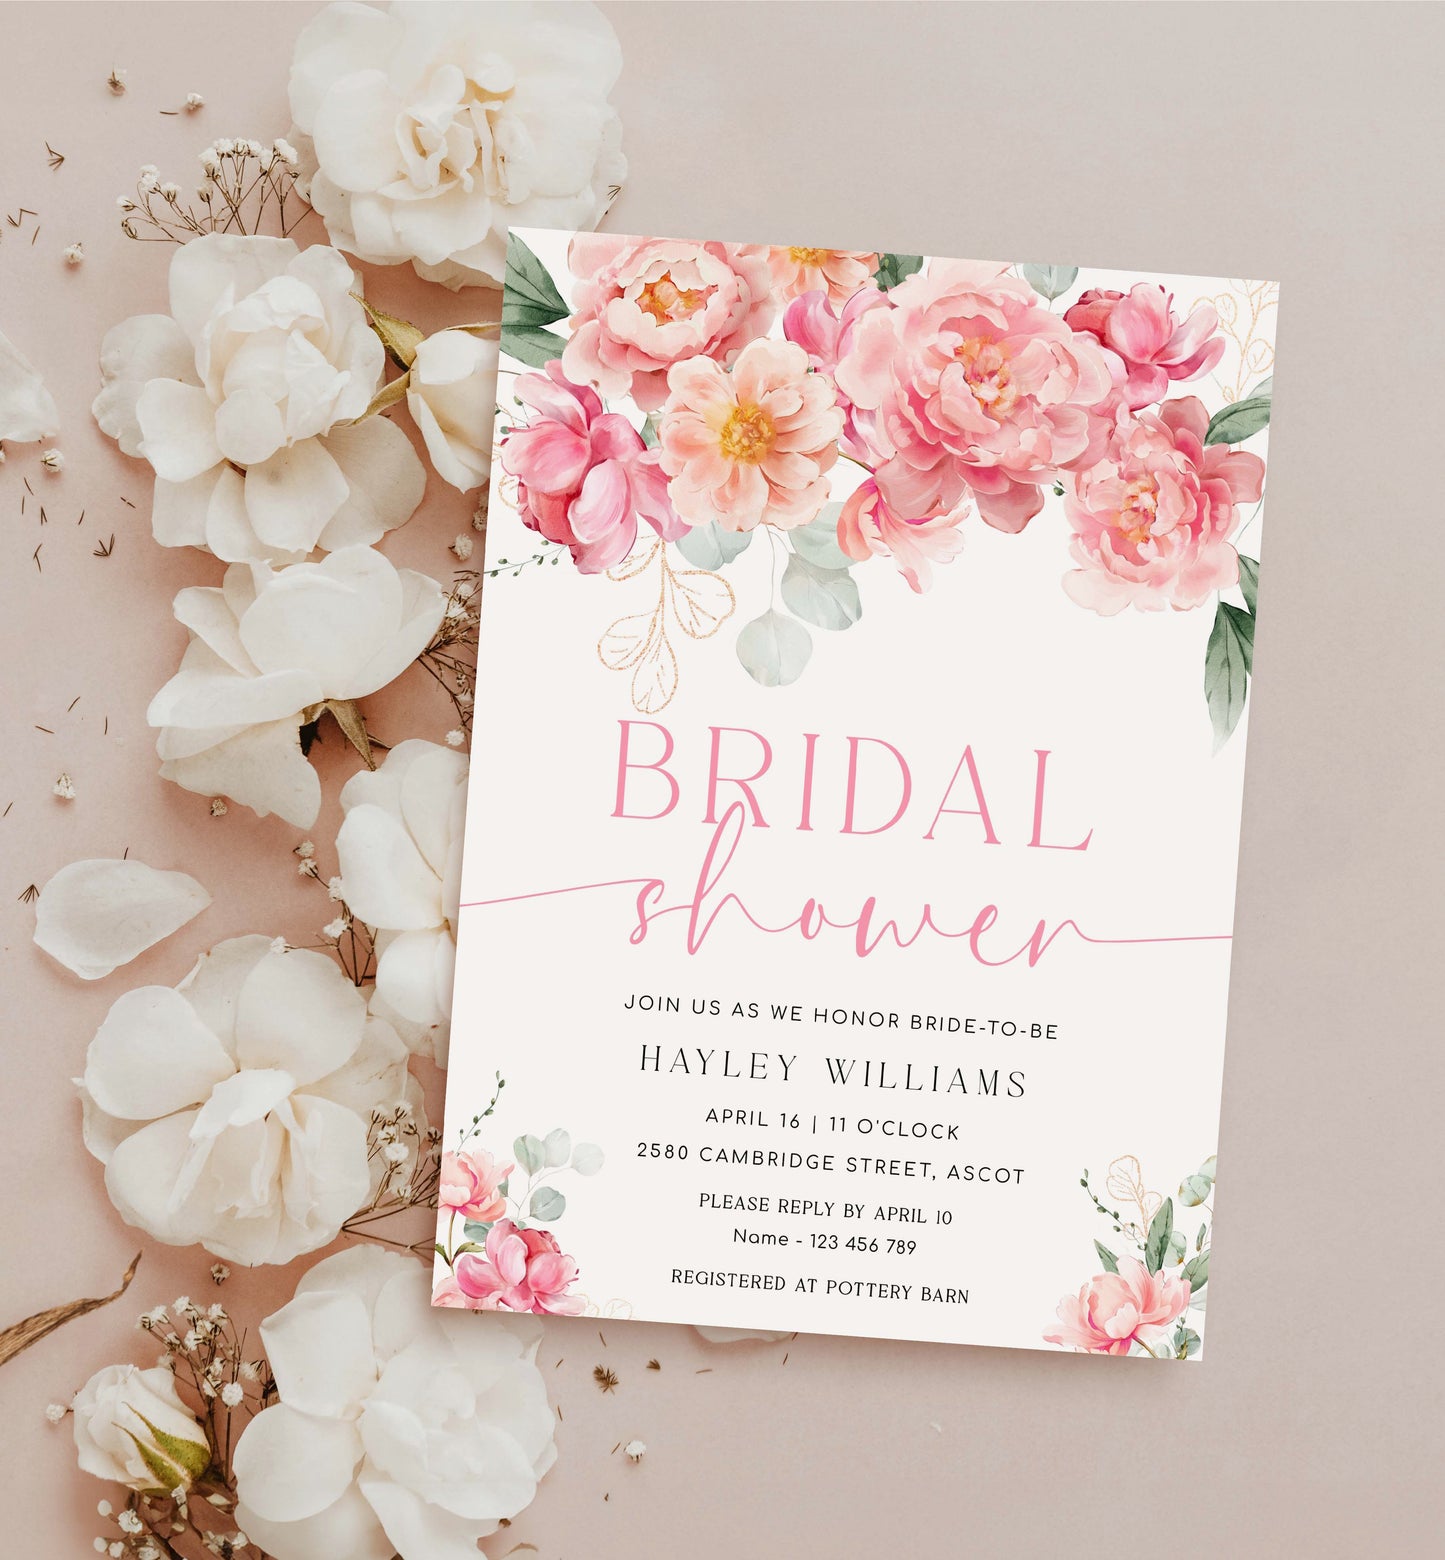 Peony Bridal Shower Invitation Suite, Finer Details, Thank You Card, Printable Hot Pink Blush Peony Floral Bridal Shower Invite, Piper